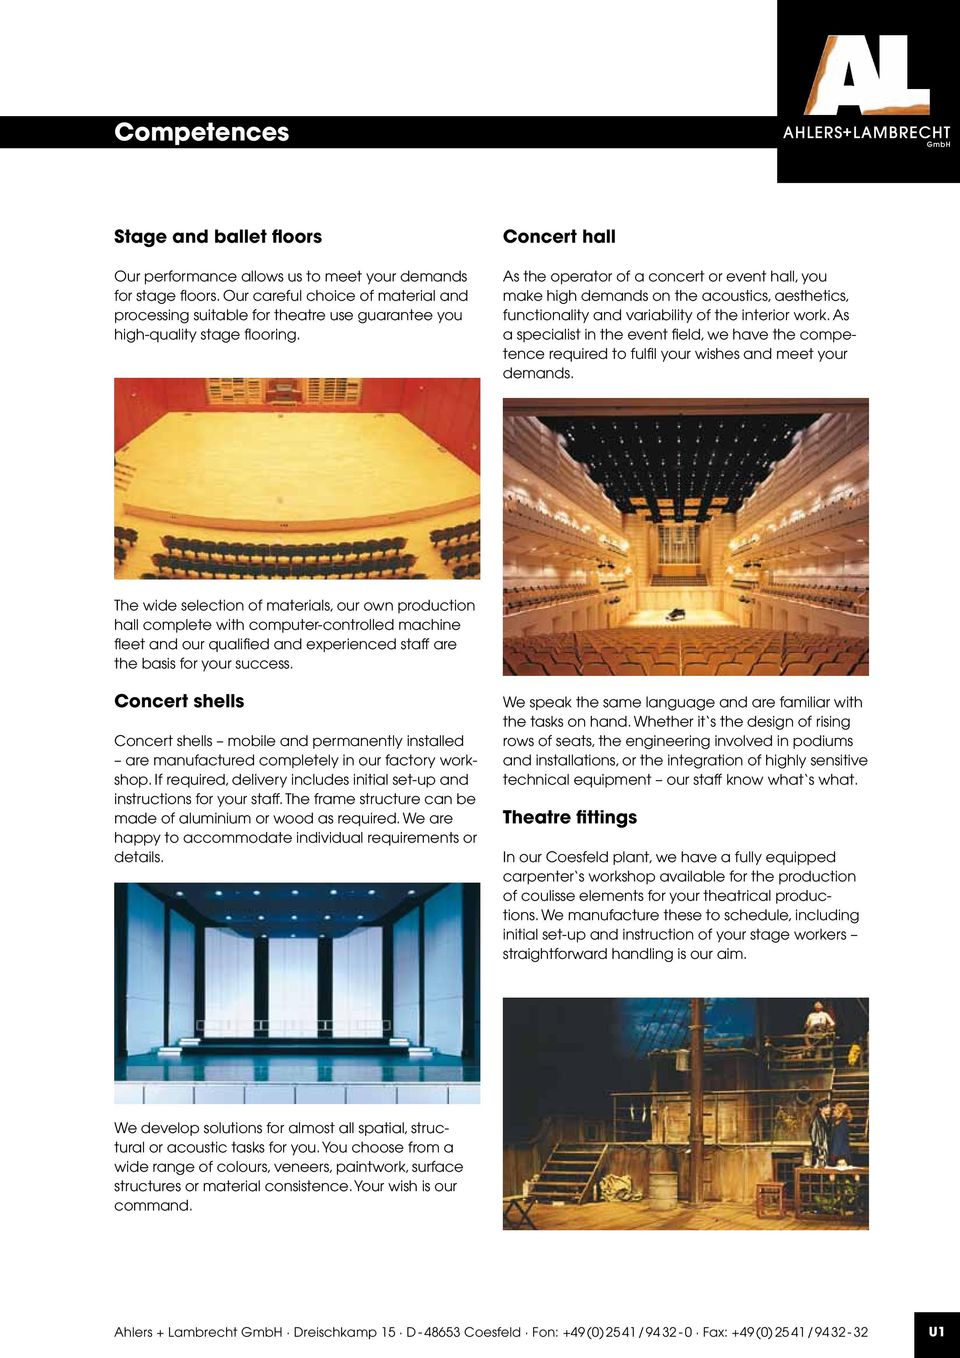 Concert hall As the operator of a concert or event hall, you make high demands on the acoustics, aesthetics, functionality and variability of the interior work.